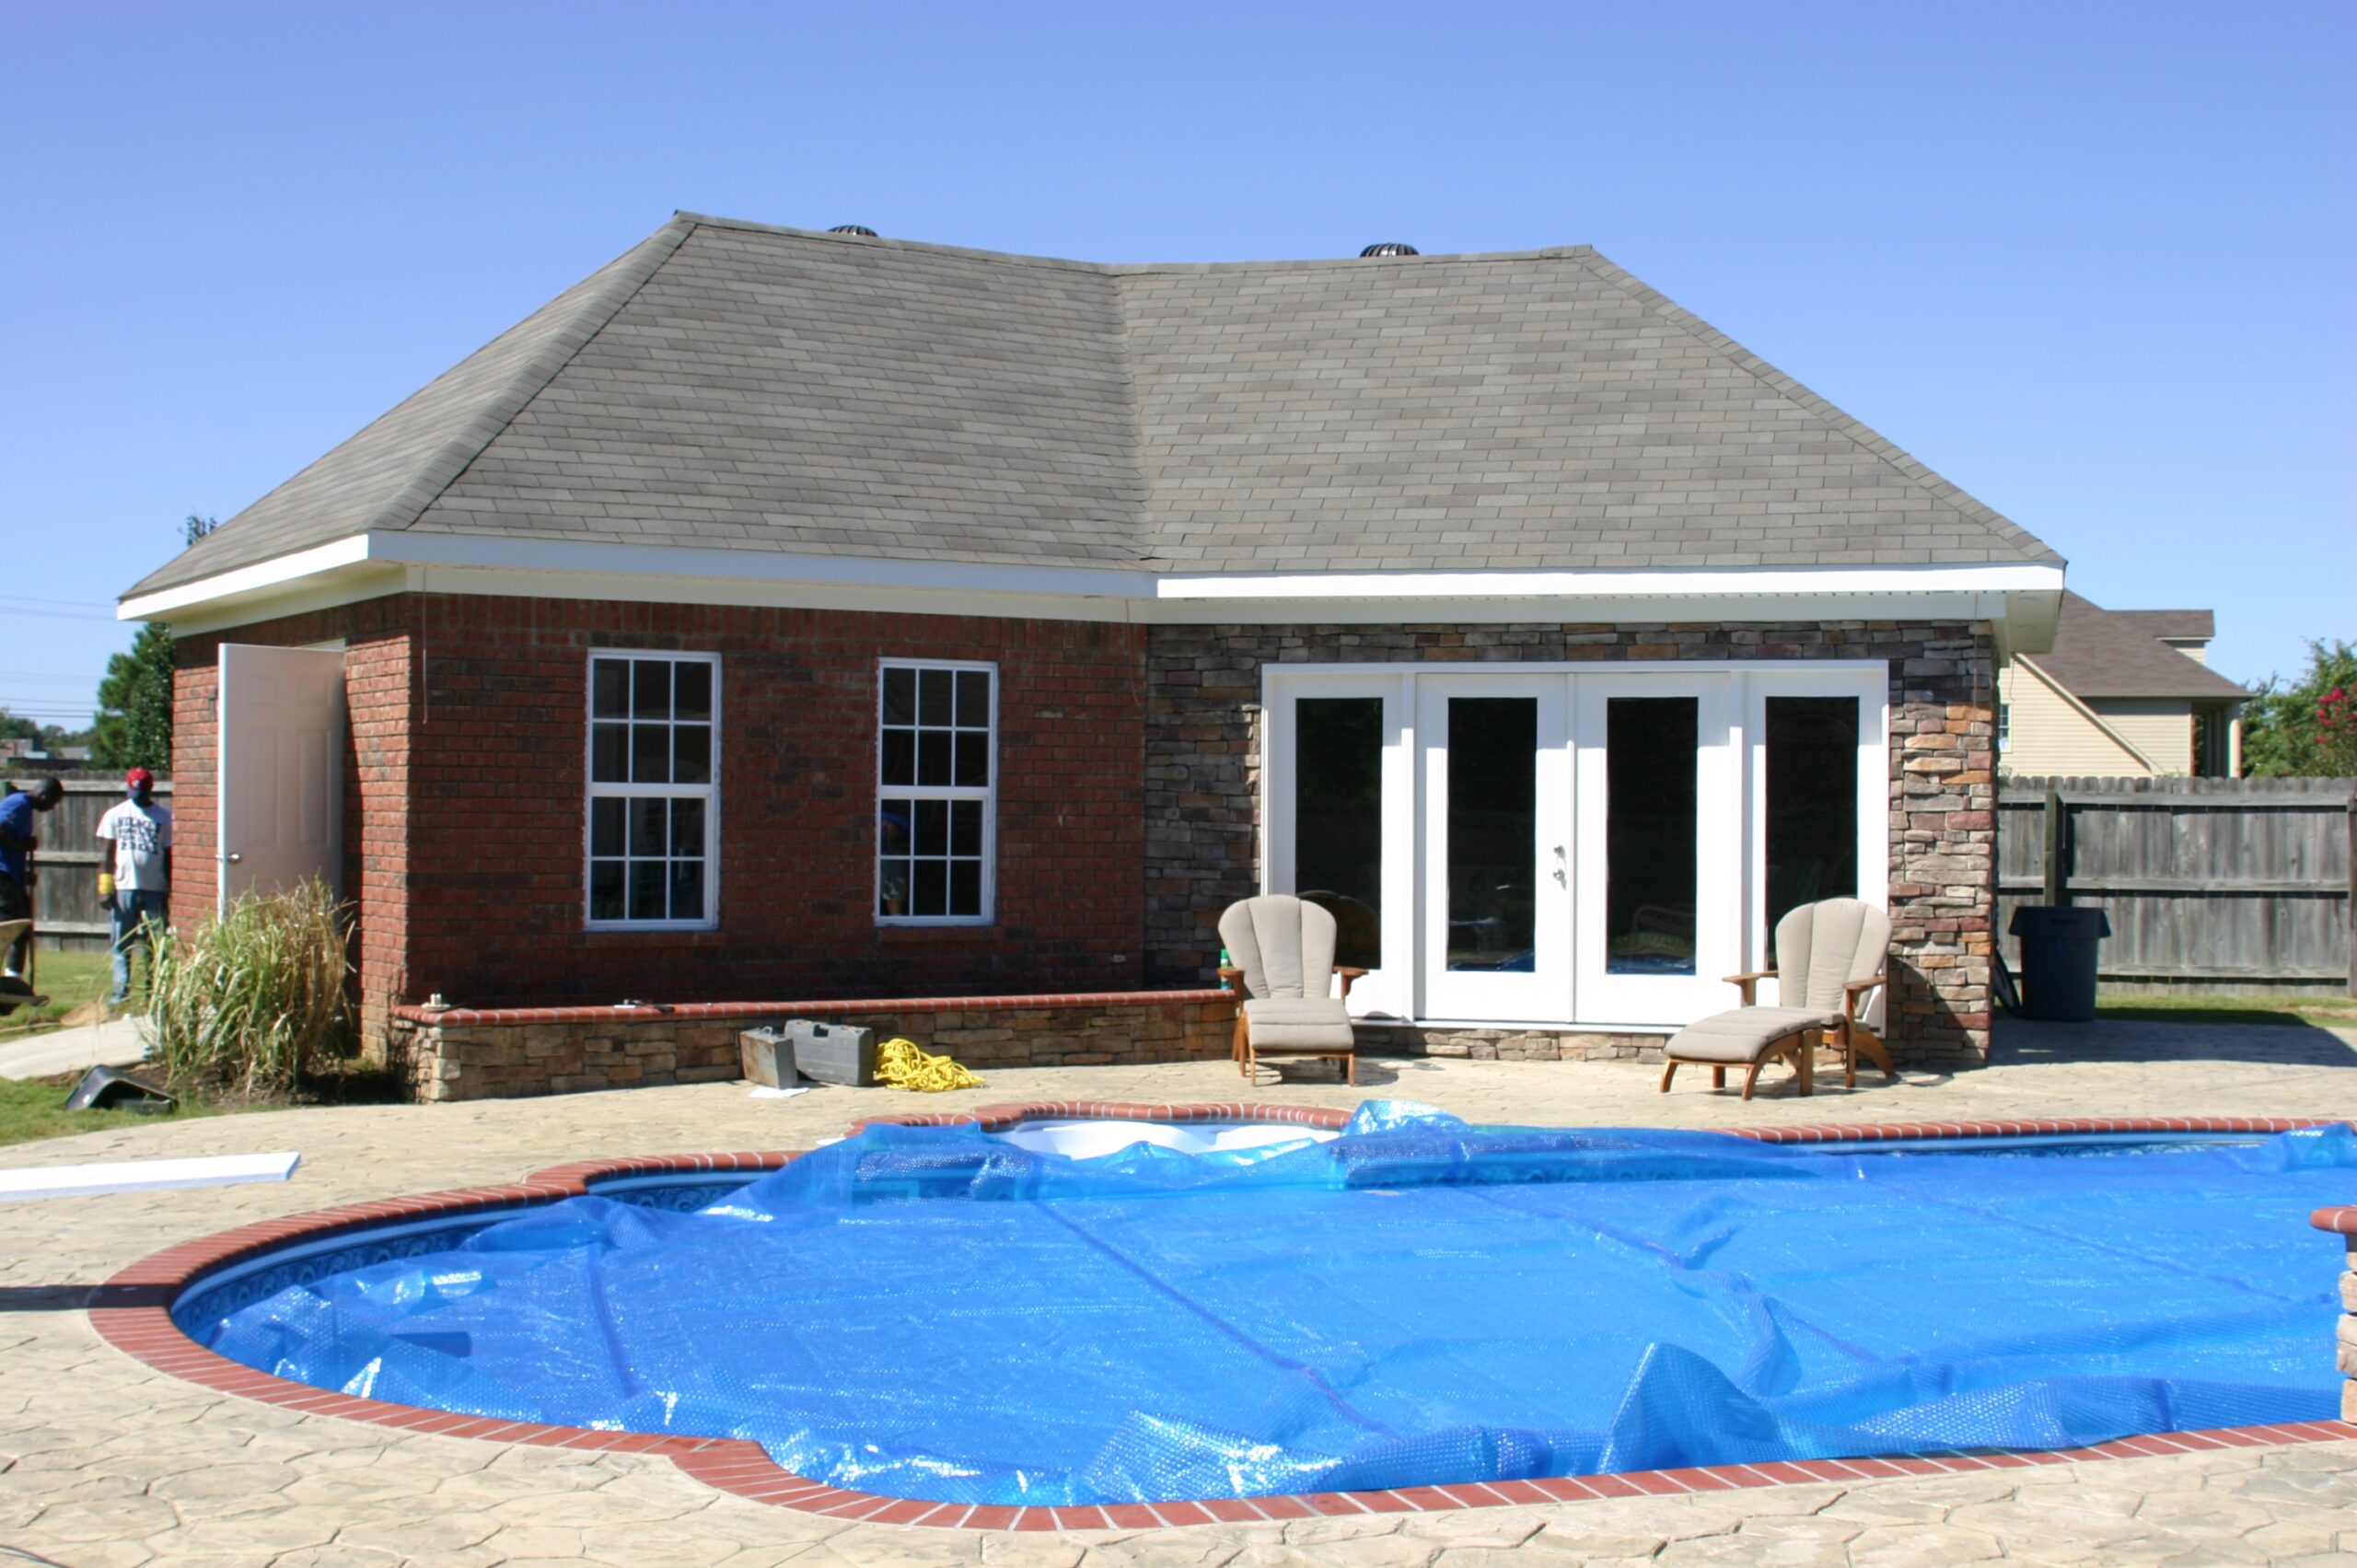 15 pool construction decisions